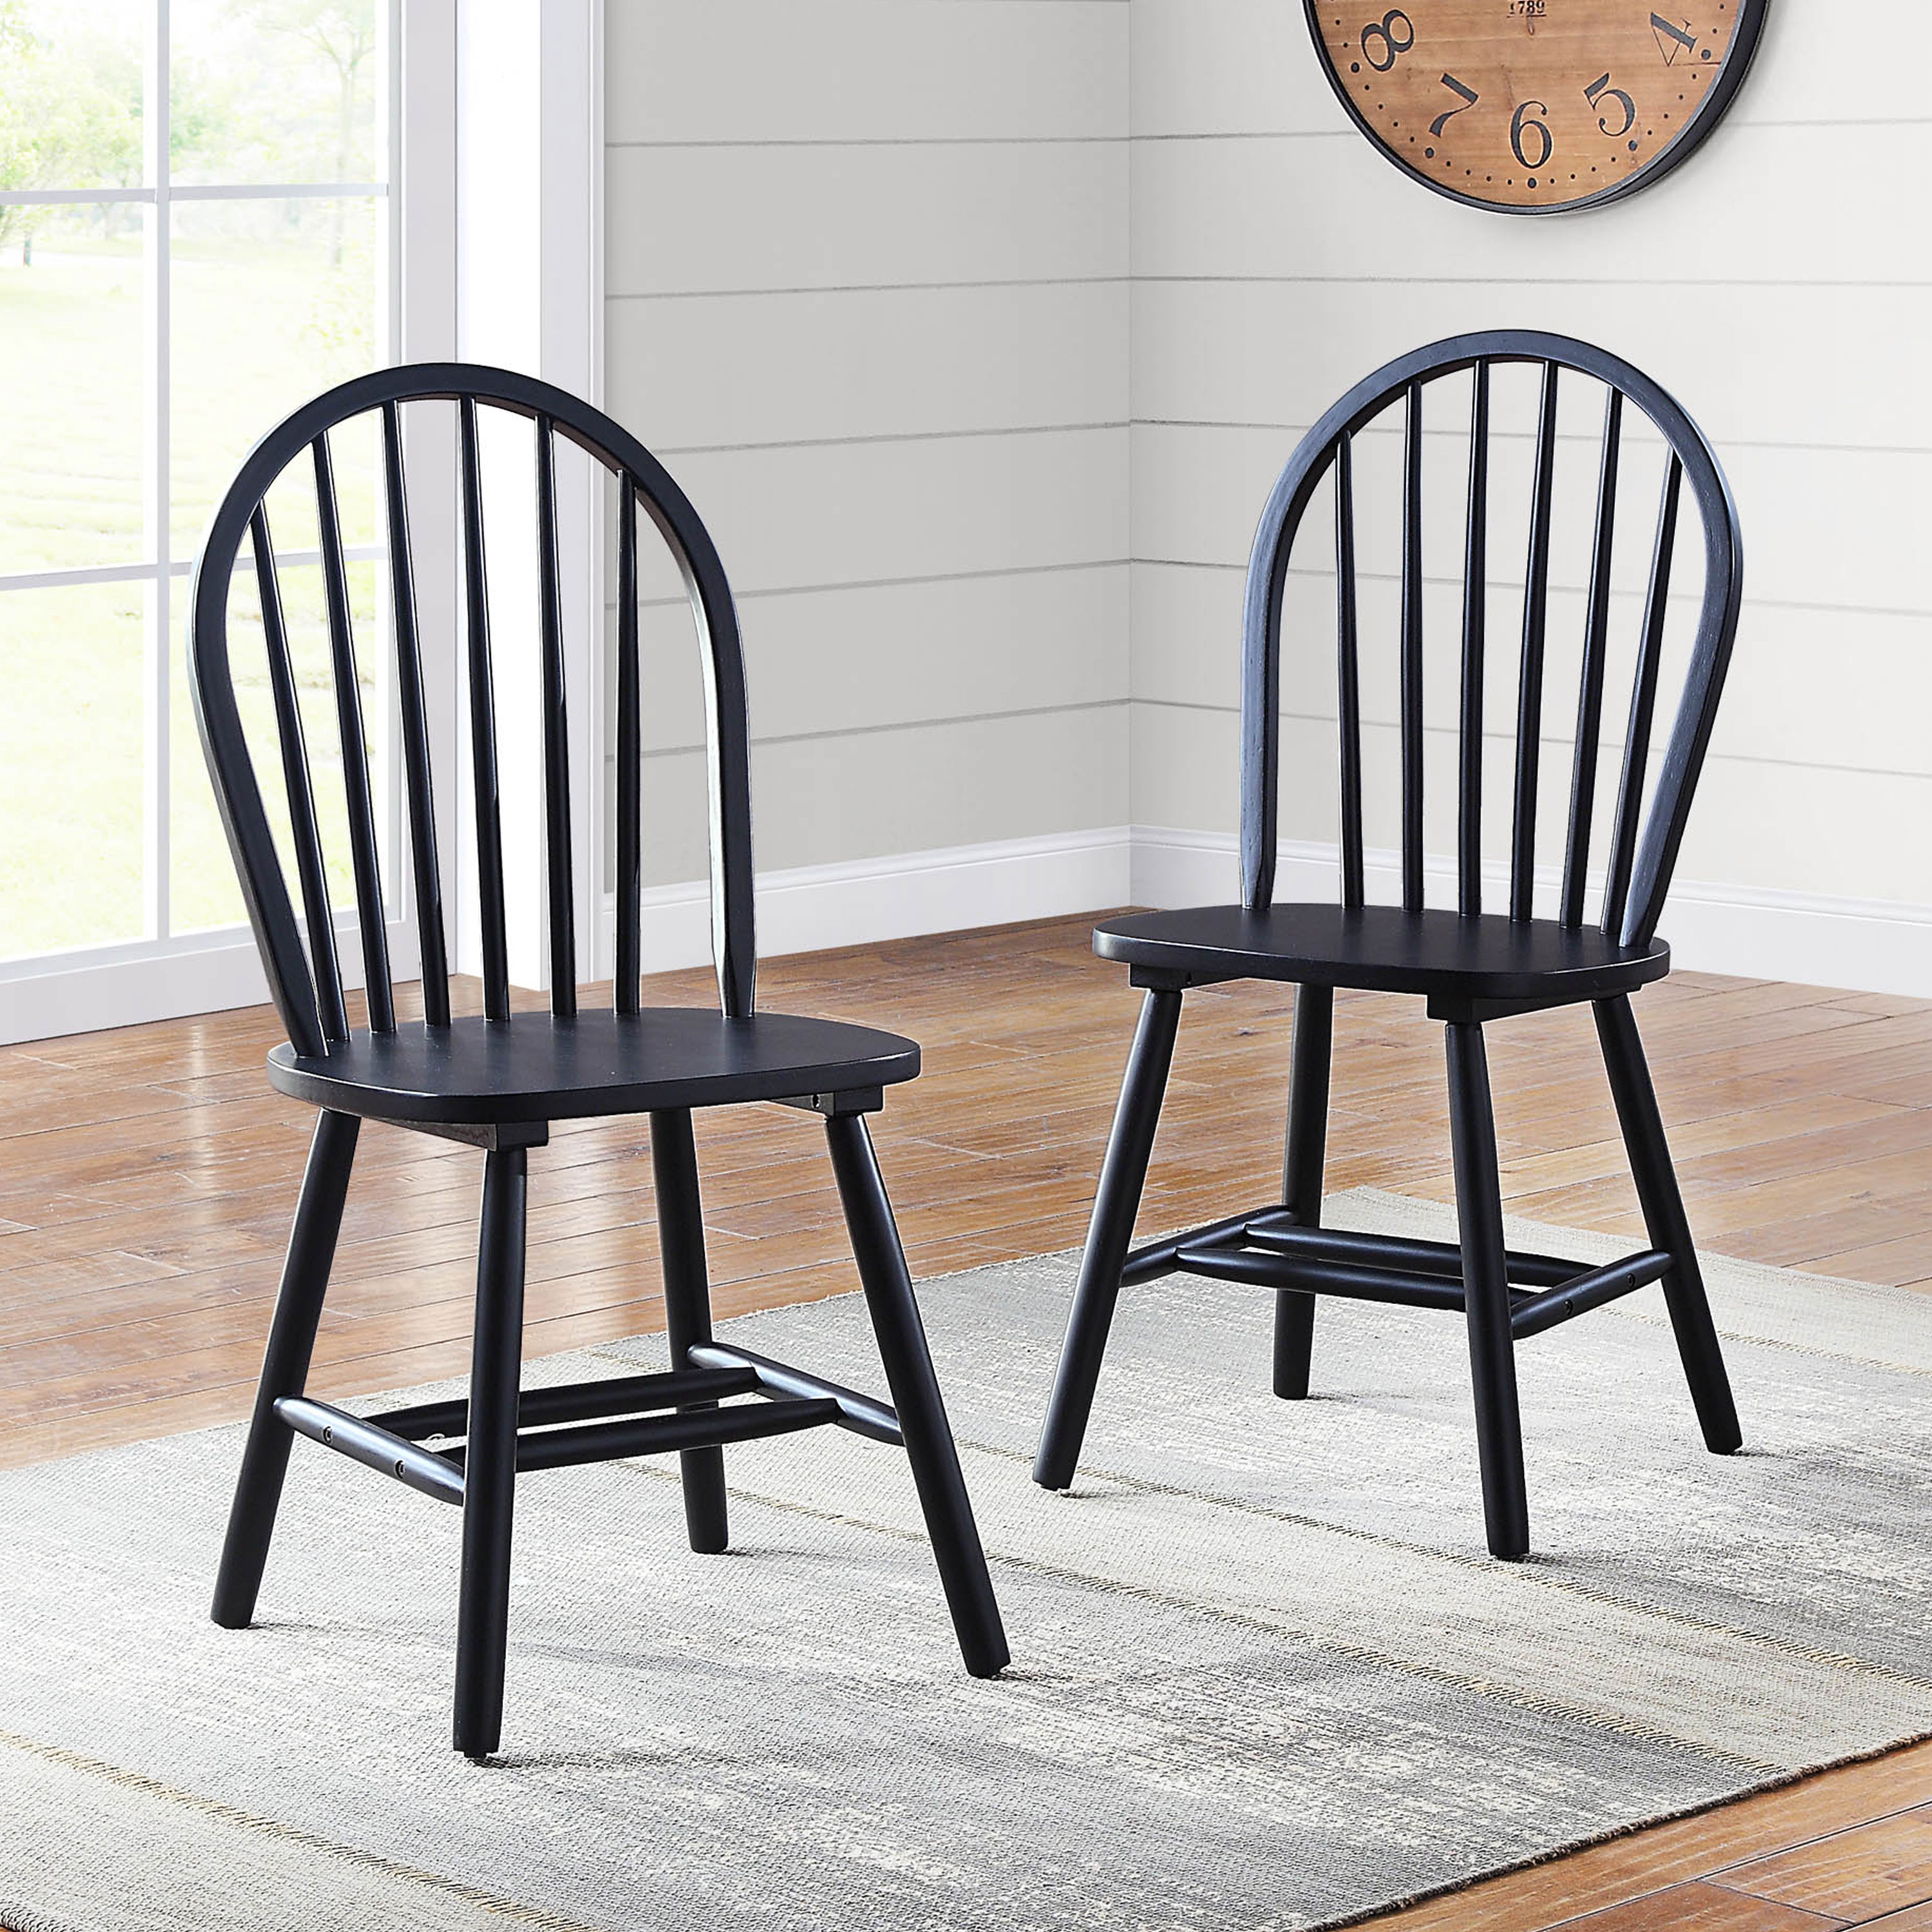 Better Homes and Gardens Autumn Lane Windsor Solid Wood Dining Chairs, Set of 2, Black Finish - image 2 of 10